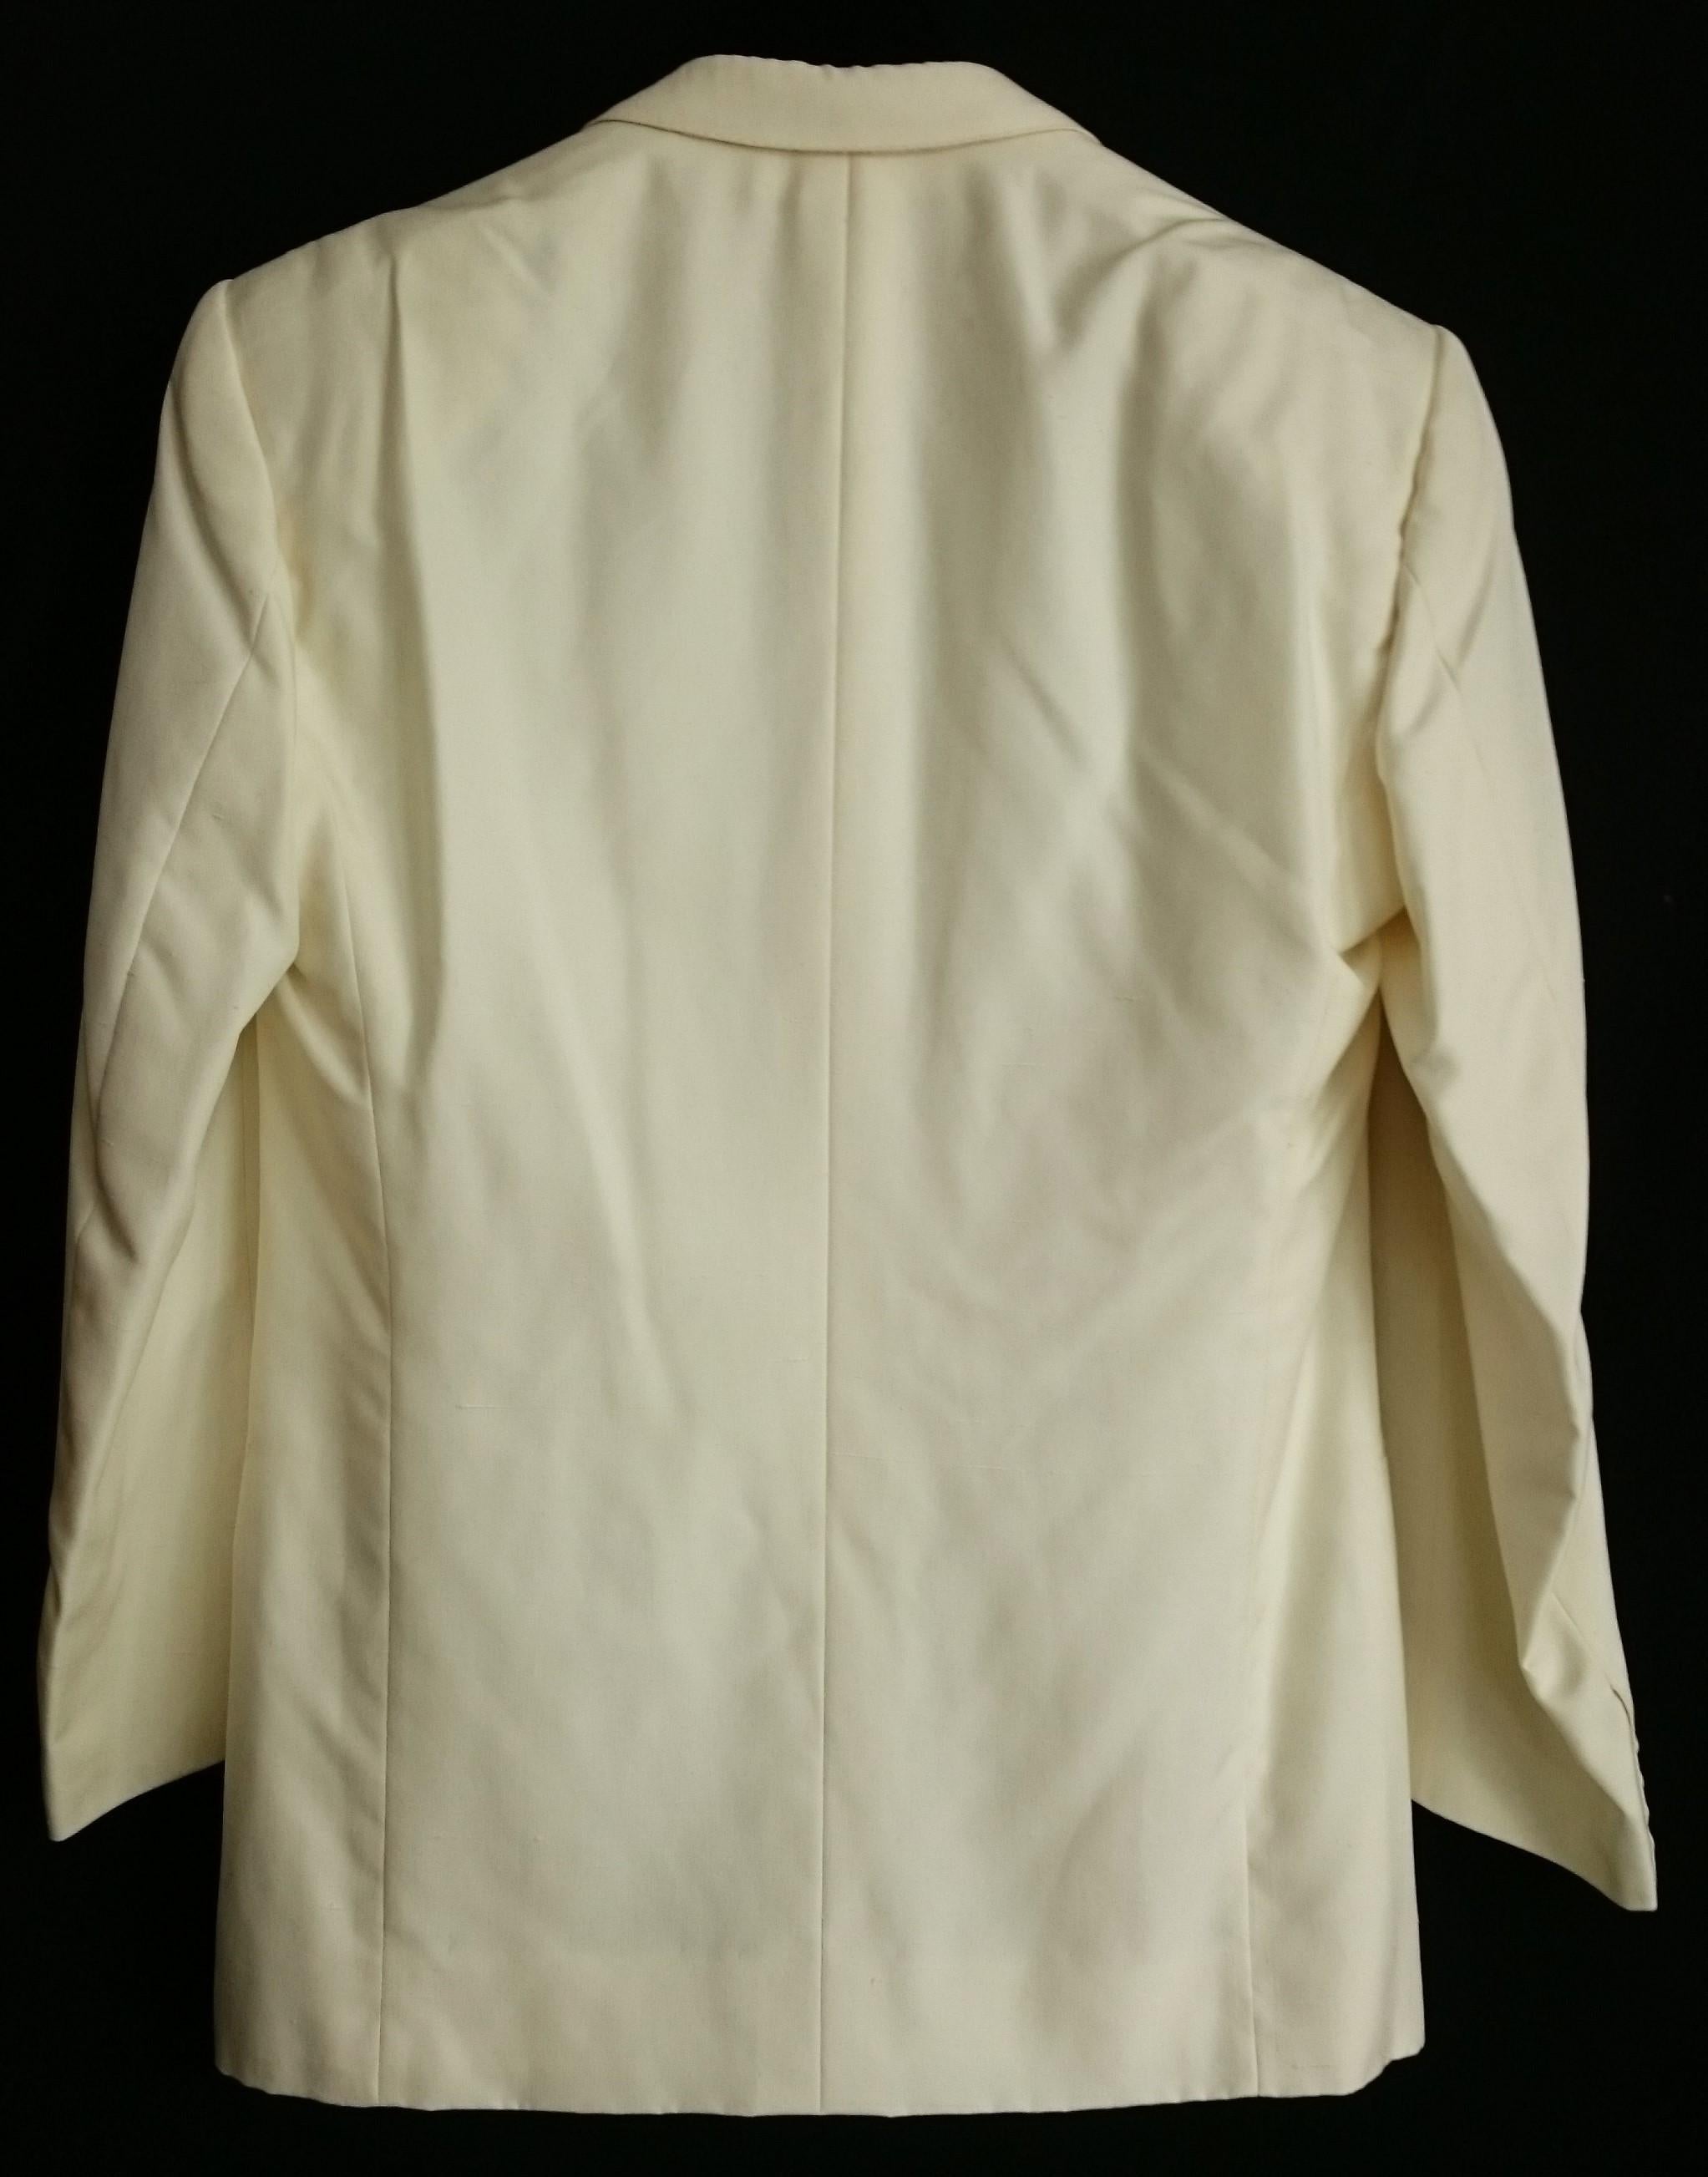 LANVIN Couture Silk Men's Cream Elegant Jacket with Black Trousers, Silk Satin Strip - Unworn, New

SIZE: equivalent to 52 IT ( EU: Medium - Large) , please review approx measurements as follows in cm. 
JACKET: lenght 80, chest underarm to underarm